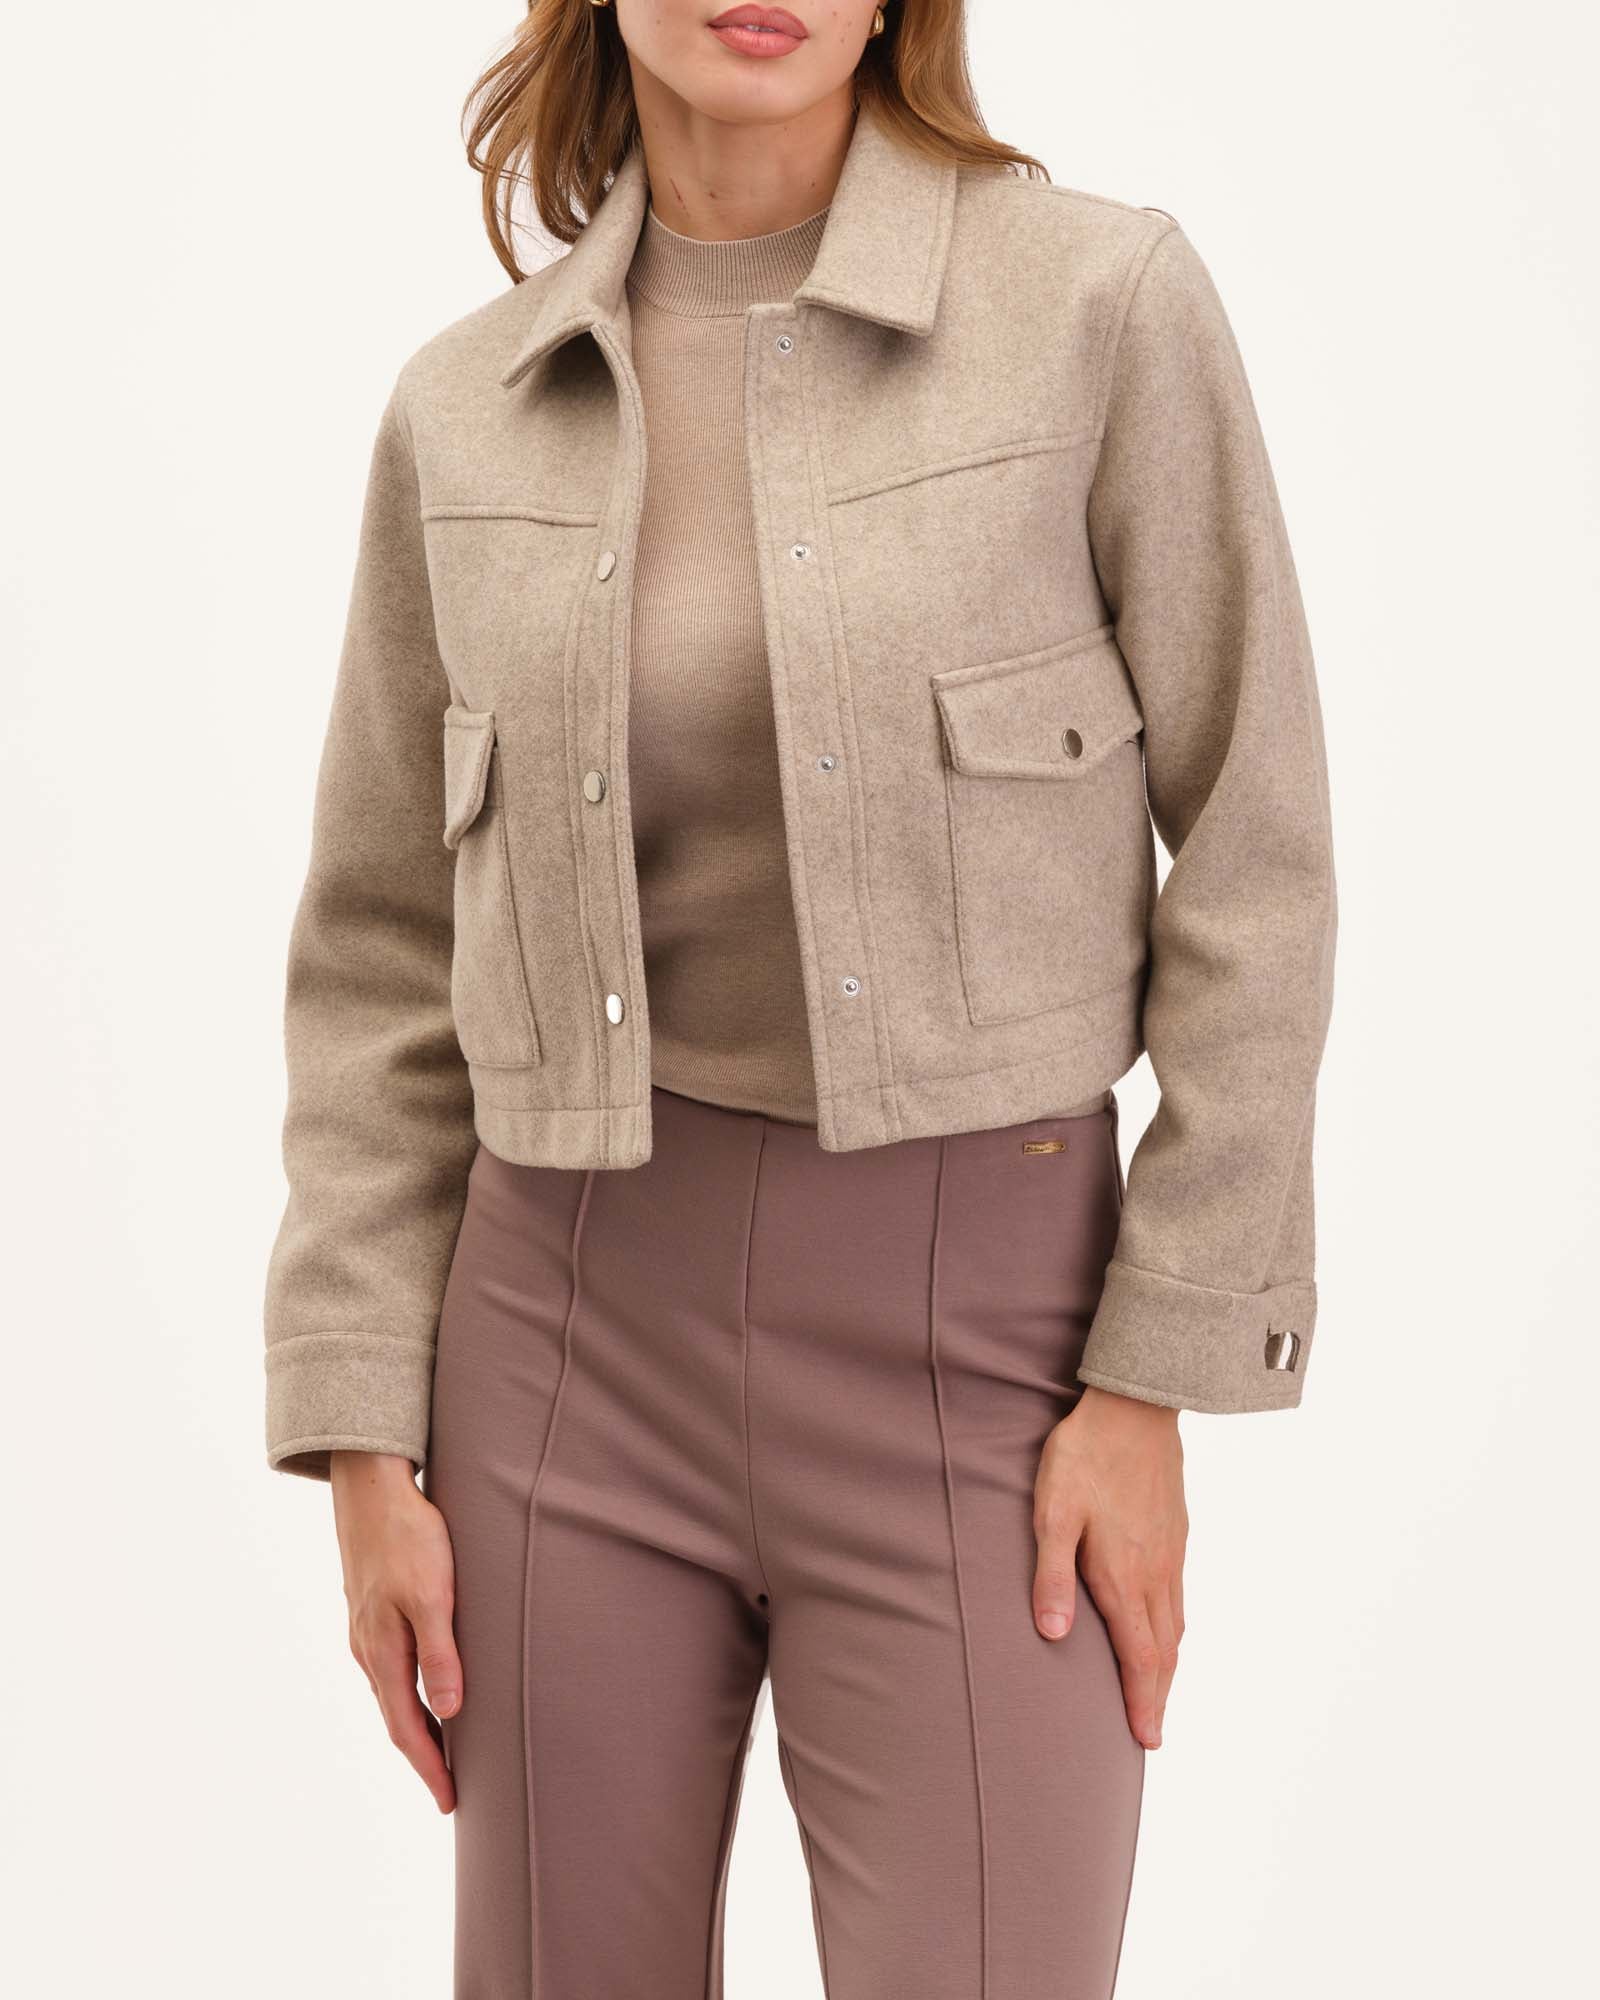 Cropped Button Front Soft Jacket